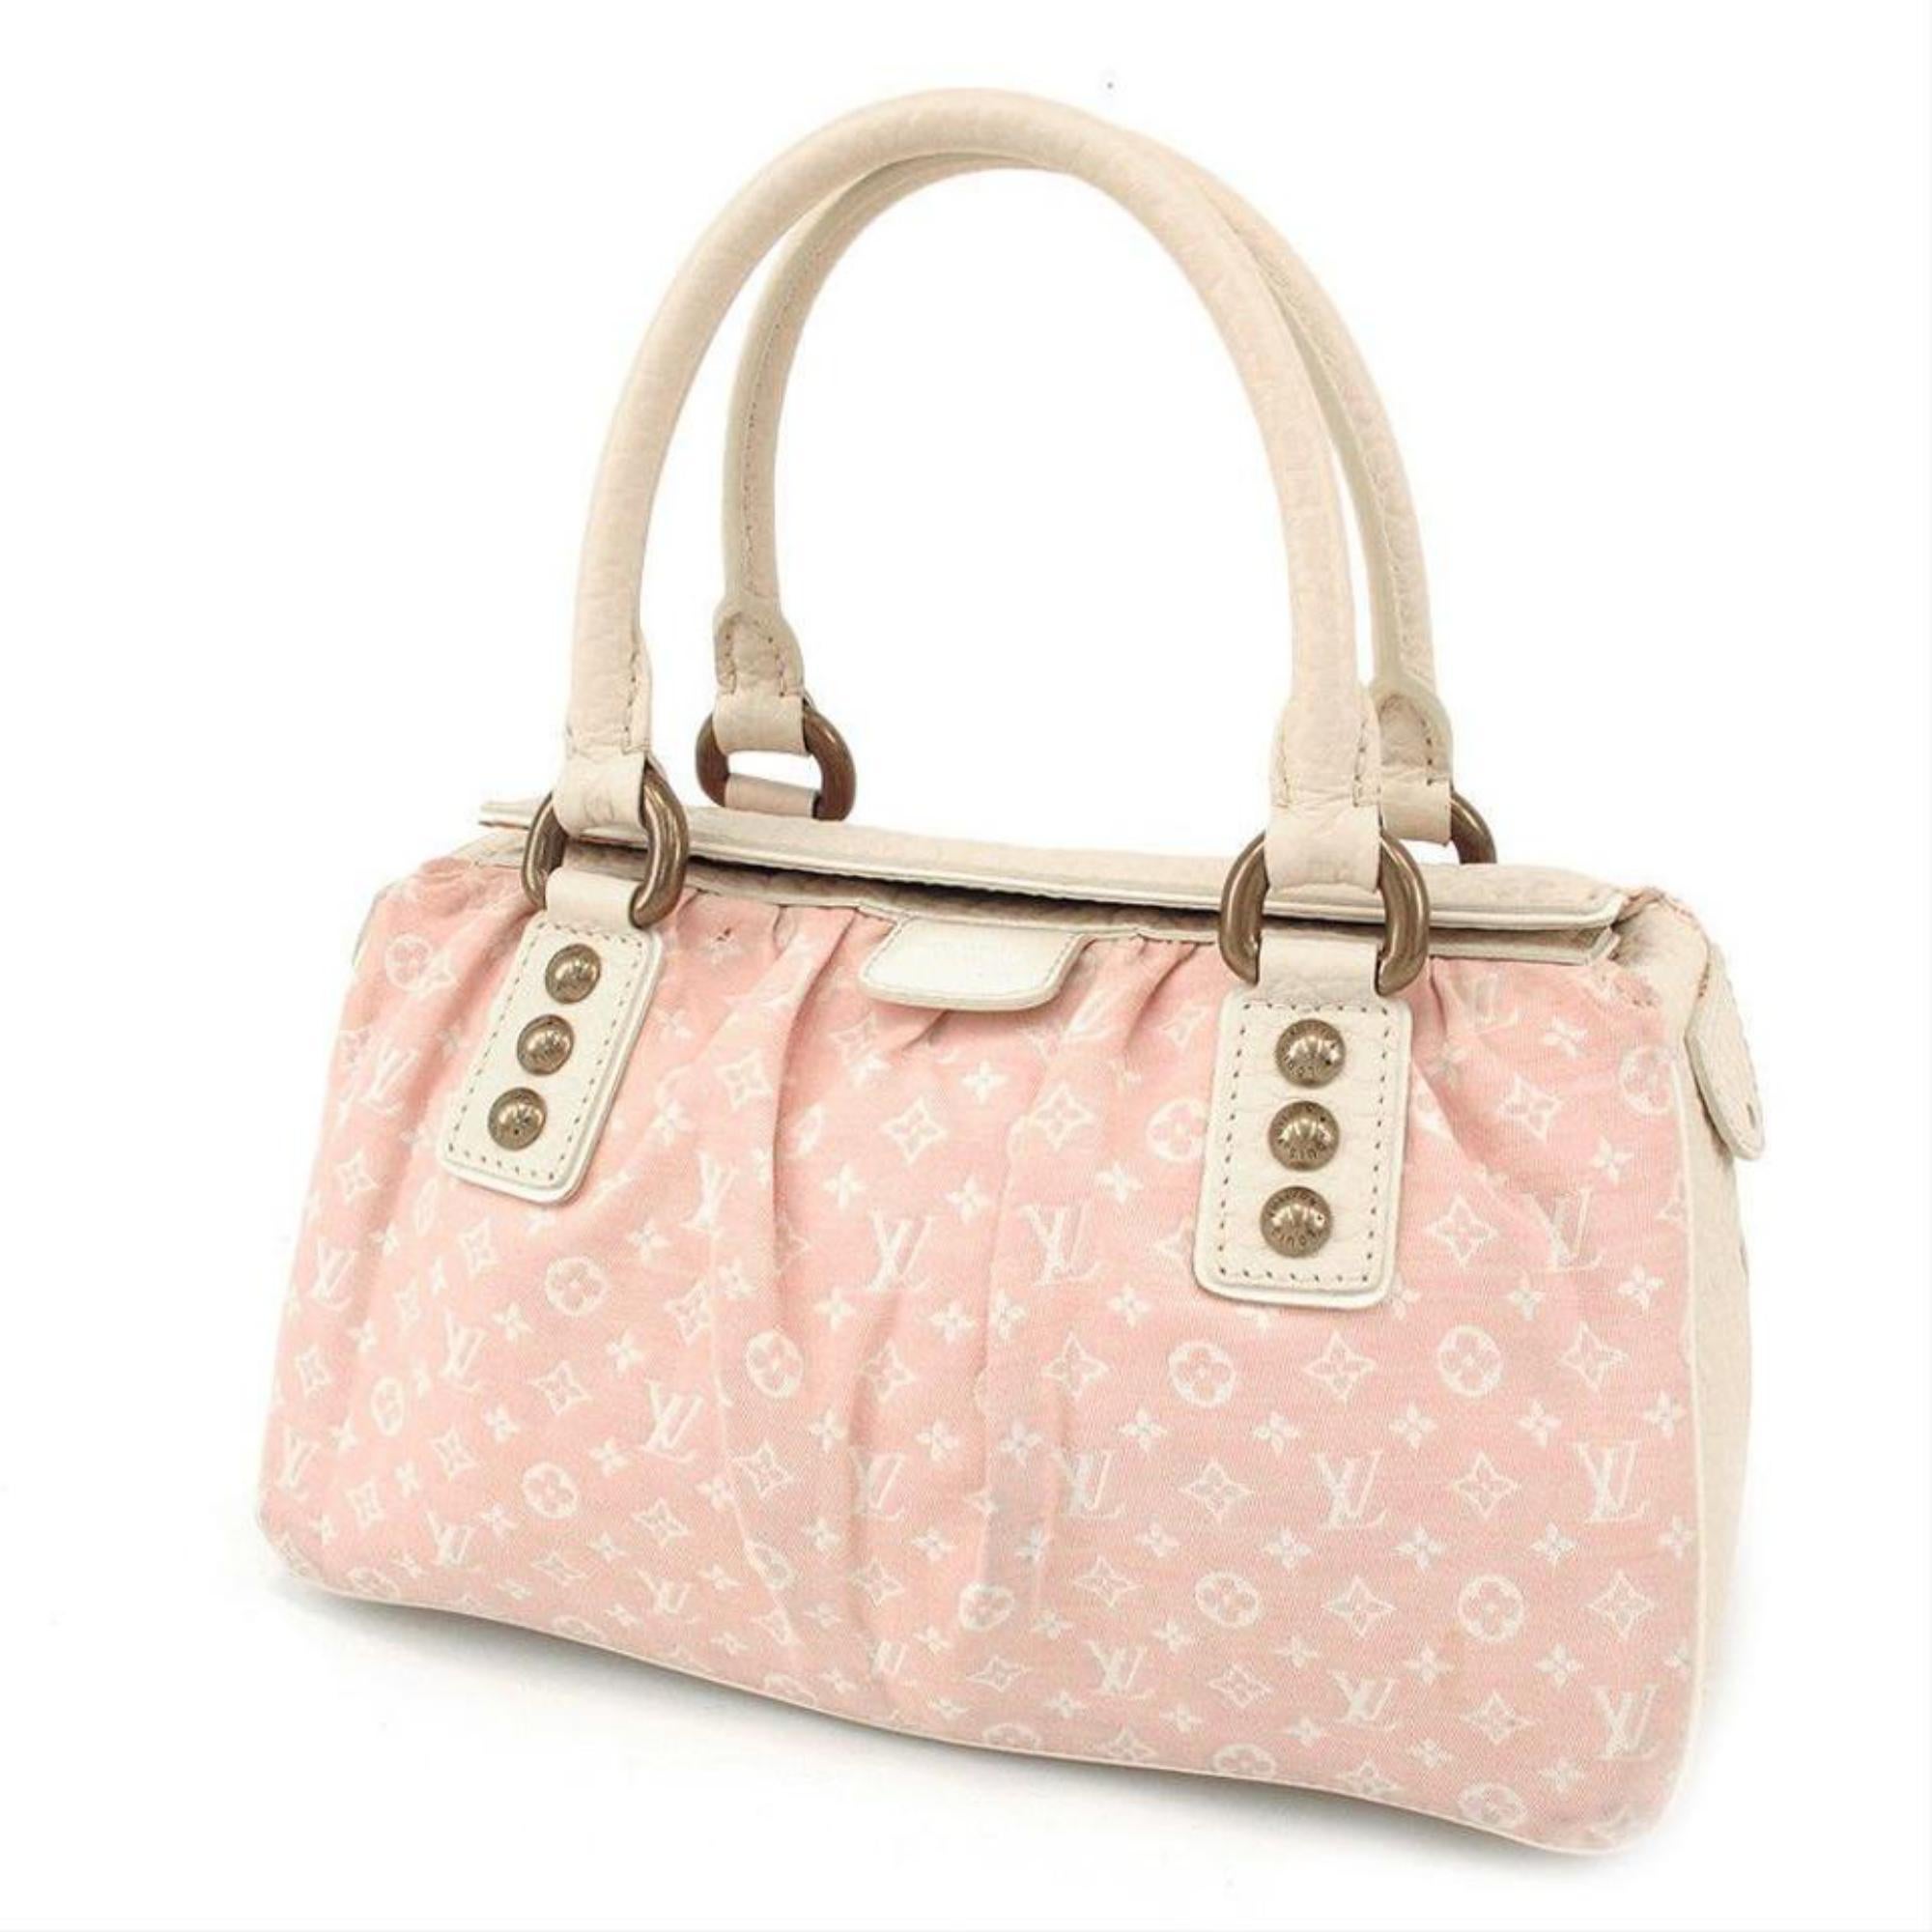 Louis Vuitton Monogram Rose Mini Lin Trapeze PM Speedy Boston Bag 1LV0308
Date Code/Serial Number: TH1015
Made In: France
Measurements: Length:  11